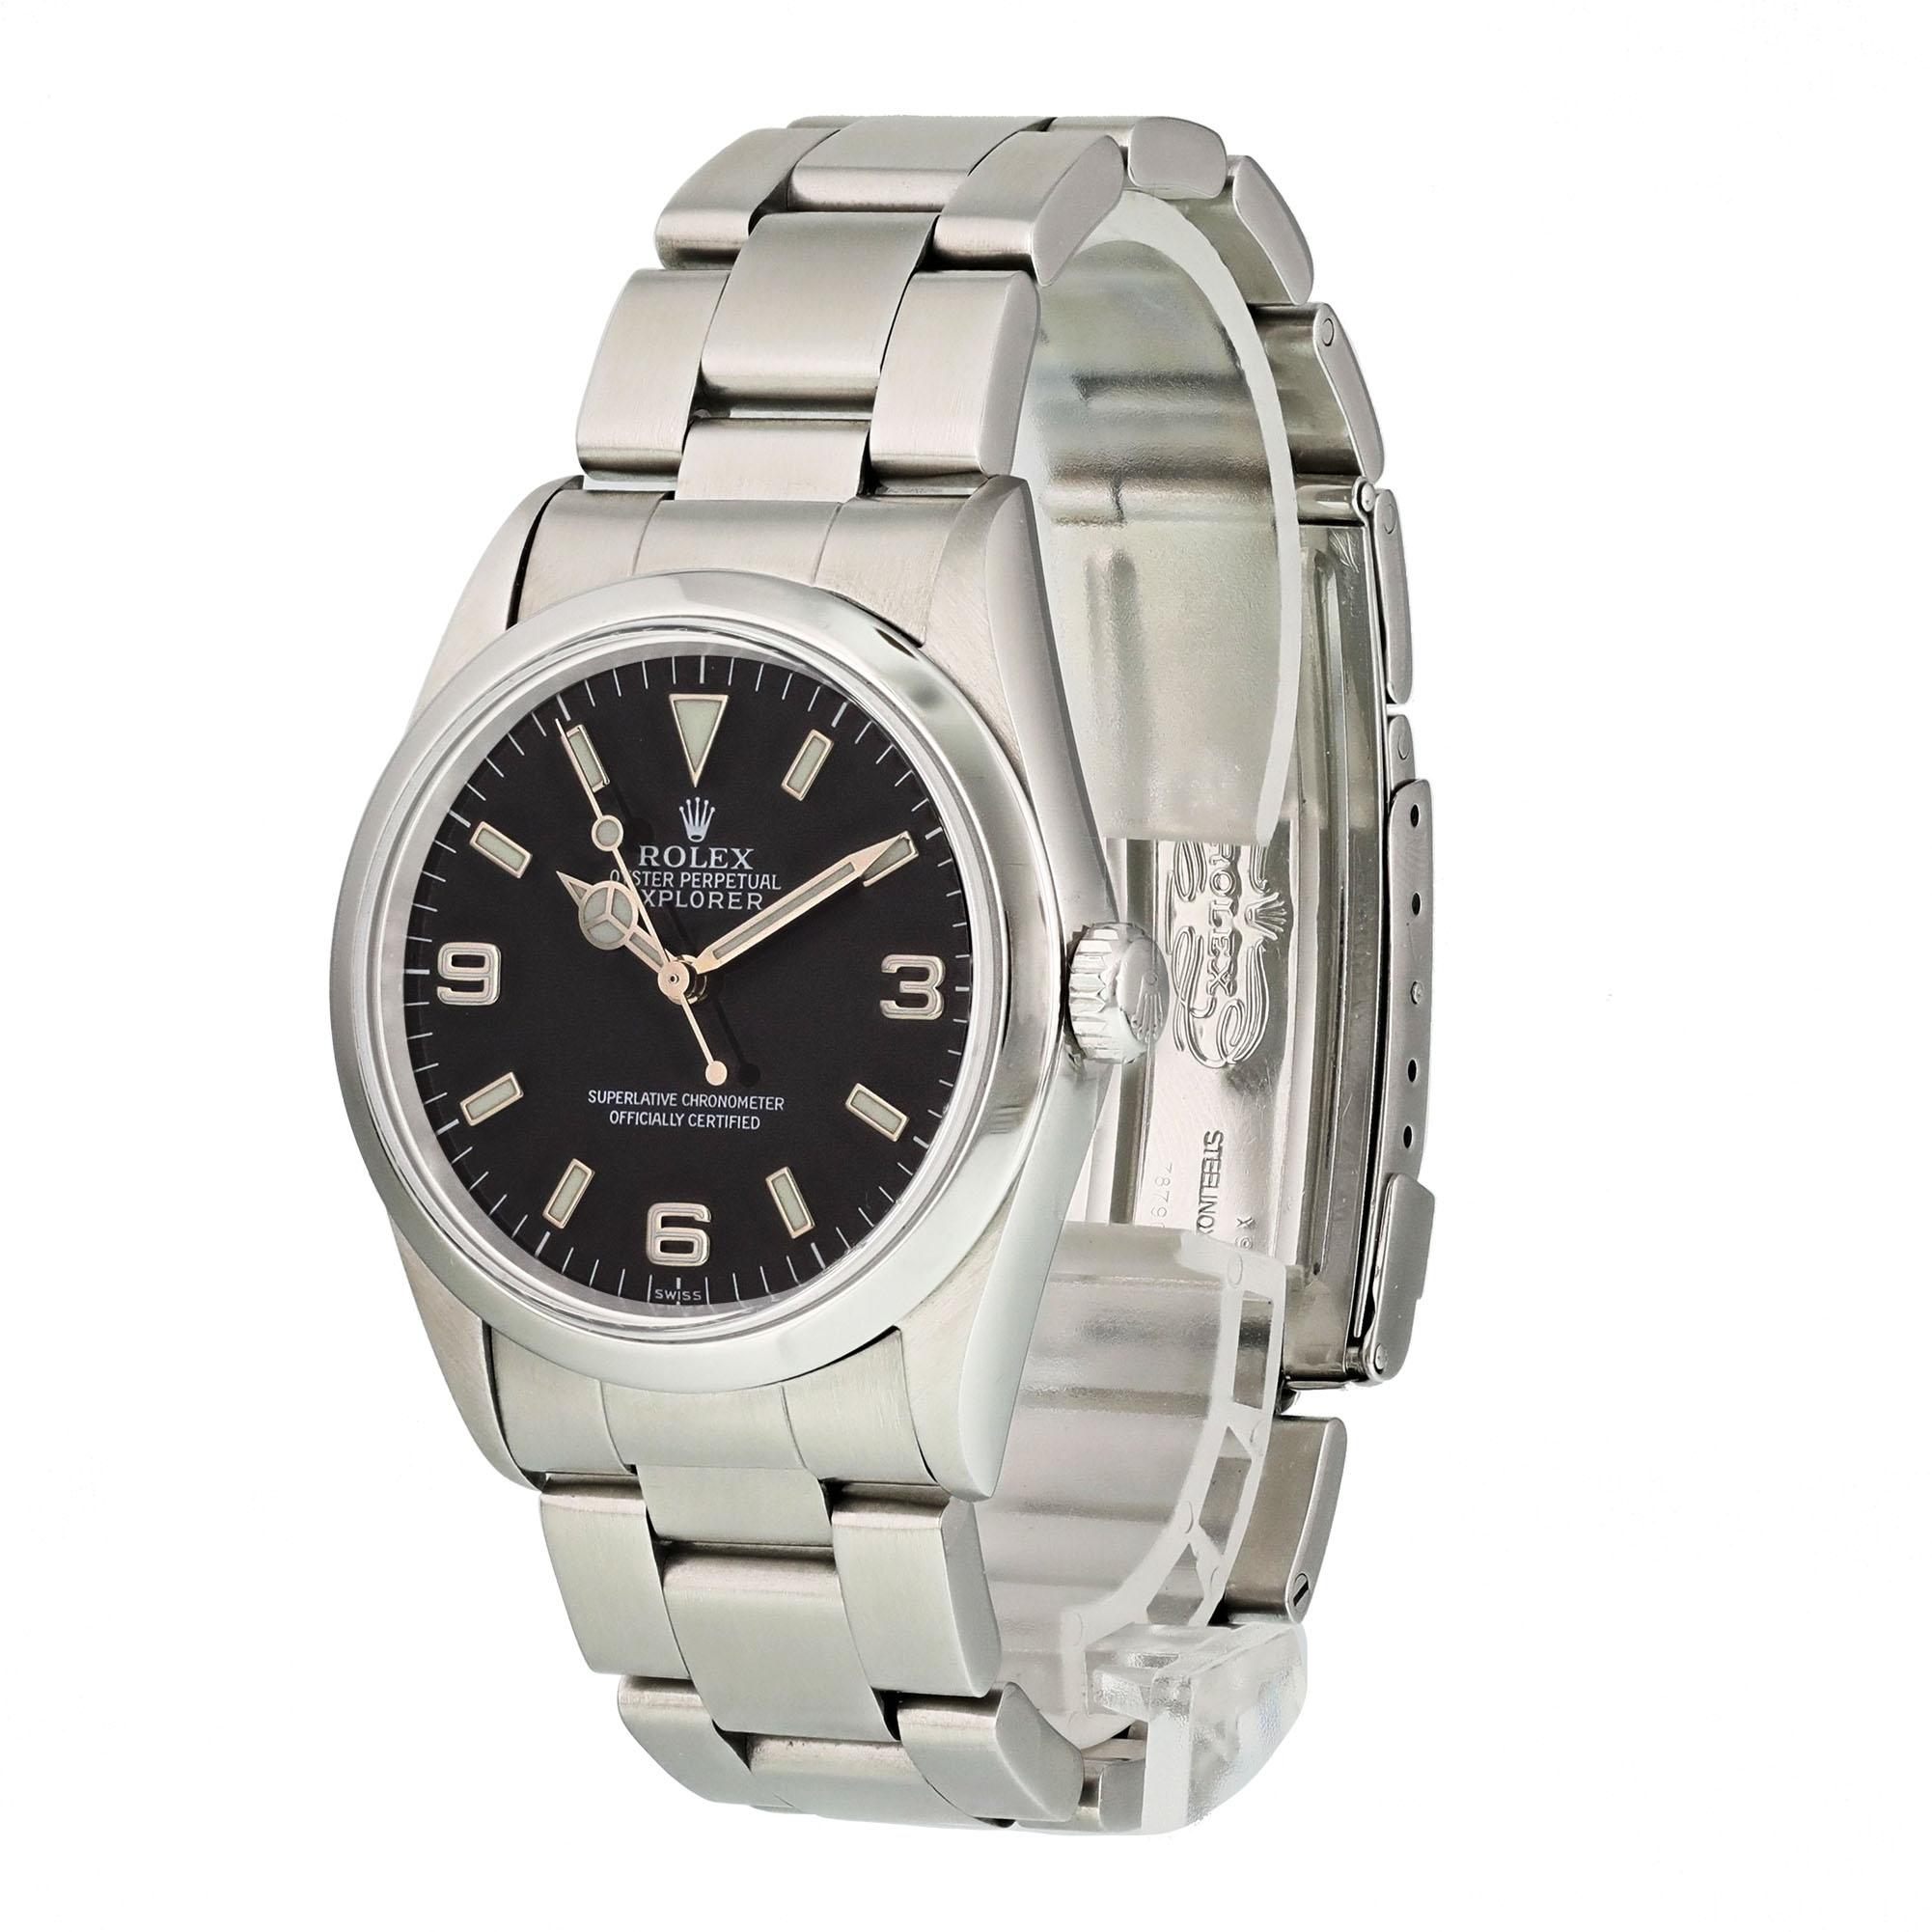 Rolex Explorer 14270 Men's Watch. 
36mm Stainless Steel case. 
Stainless Steel Stationary bezel. 
Black dial with Luminous Steel hands and Arabic numeral hour markers. 
Minute markers on the outer dial. 
Stainless Steel Bracelet with Fold Over Clasp